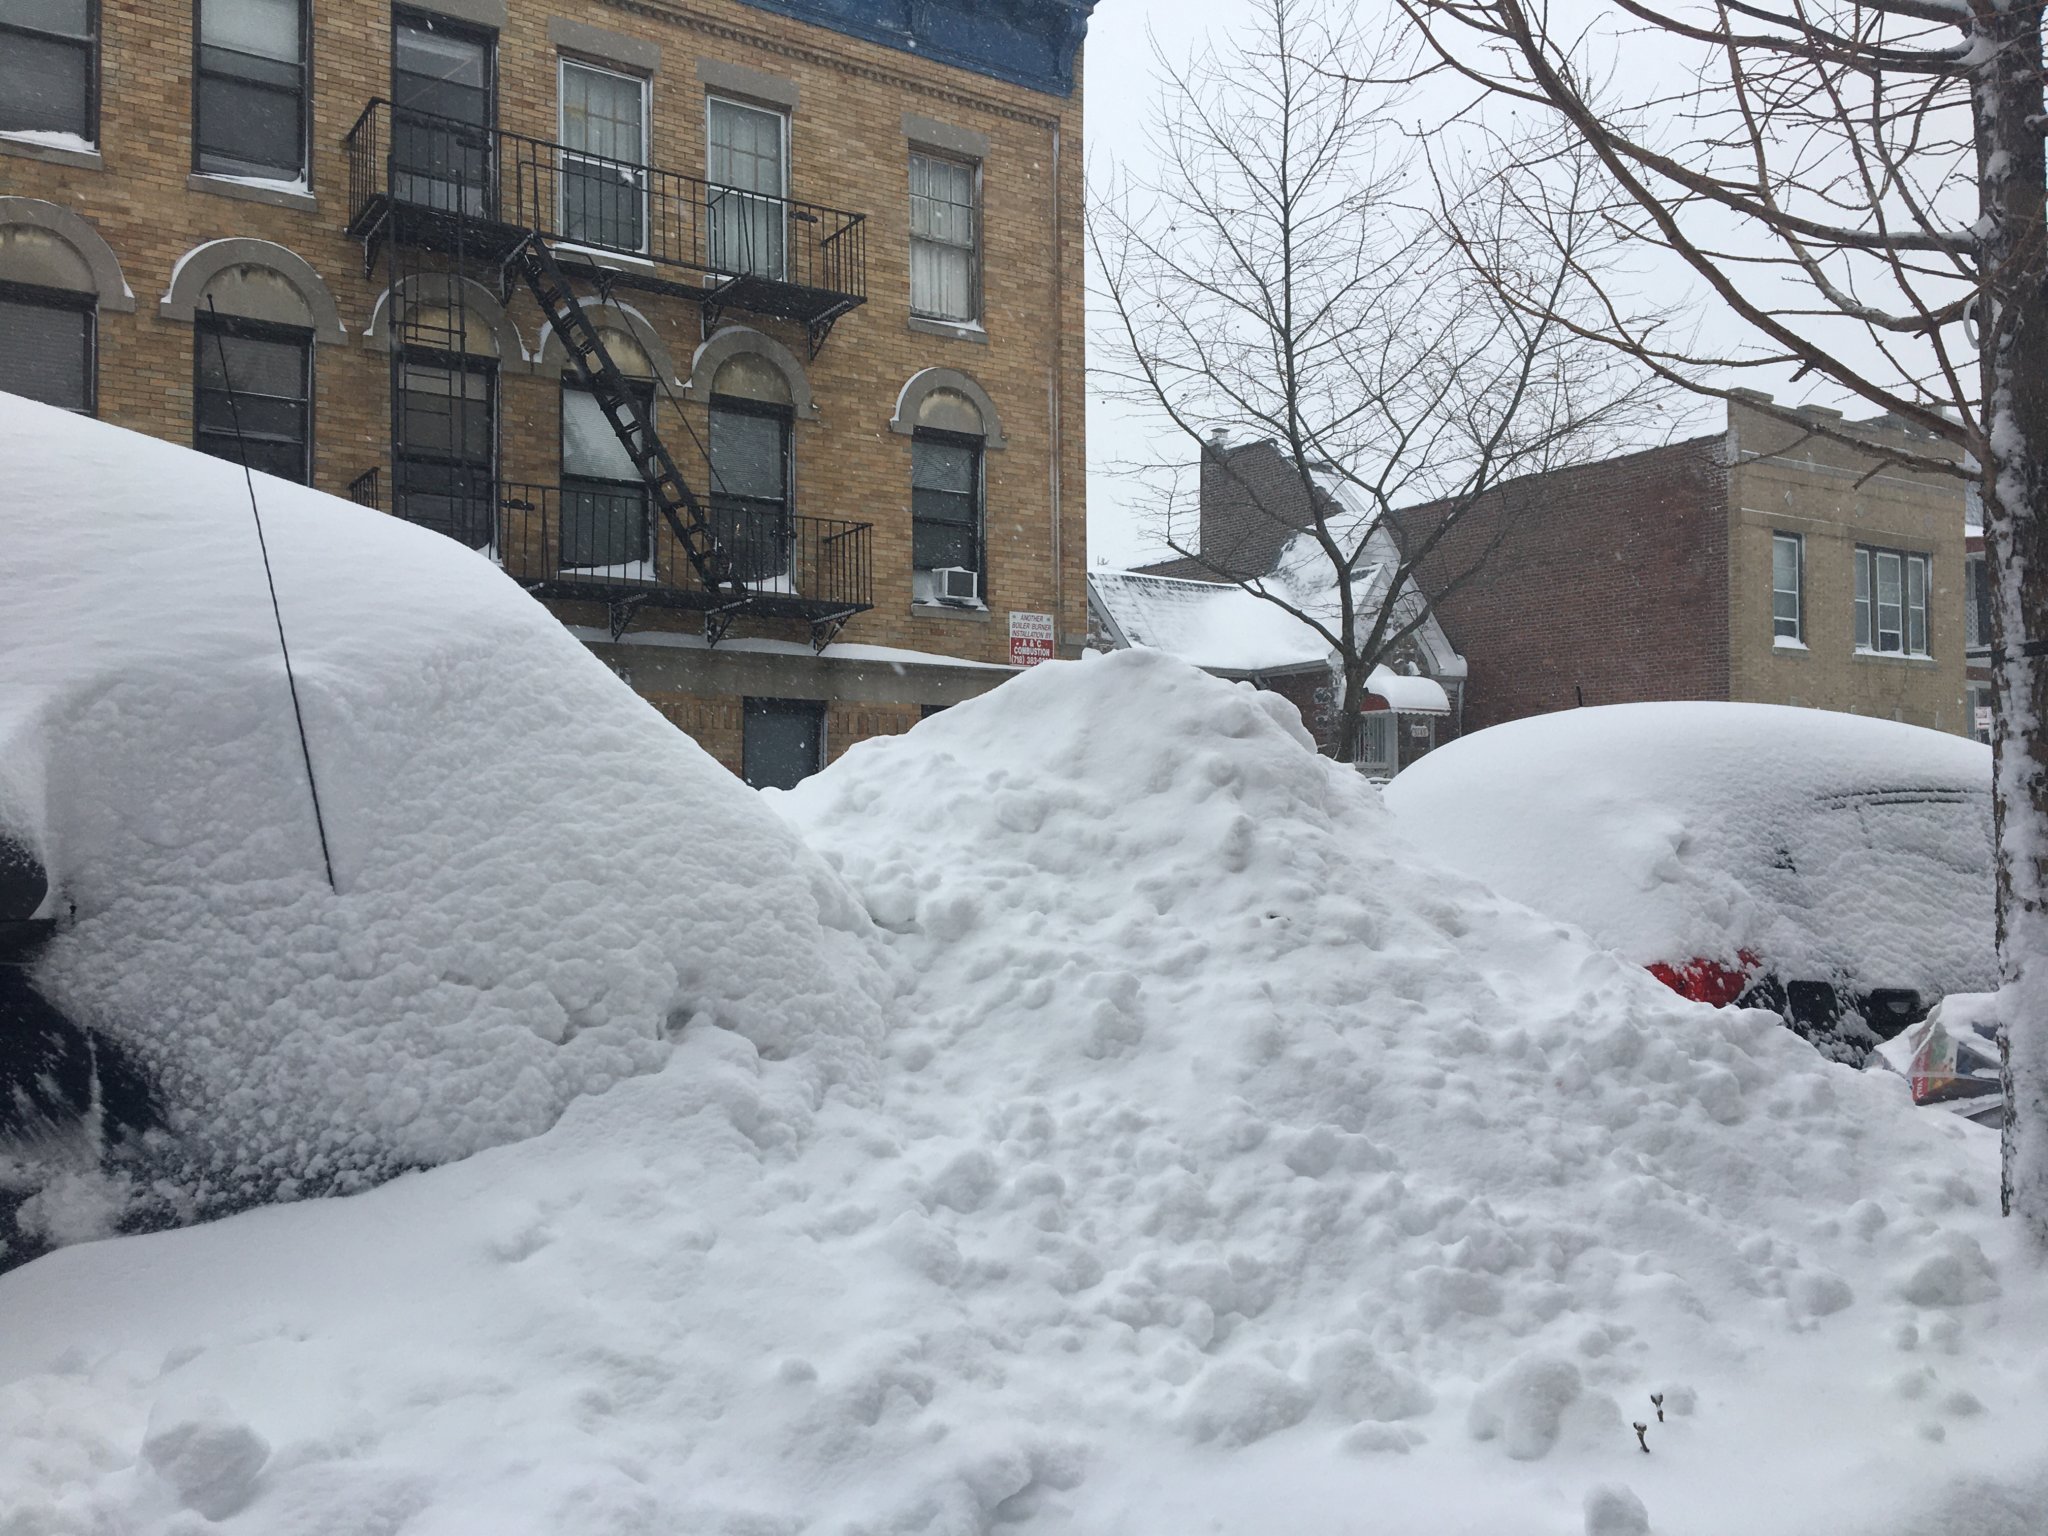 PHOTOS Nor’easter drops several inches of snow across New York City